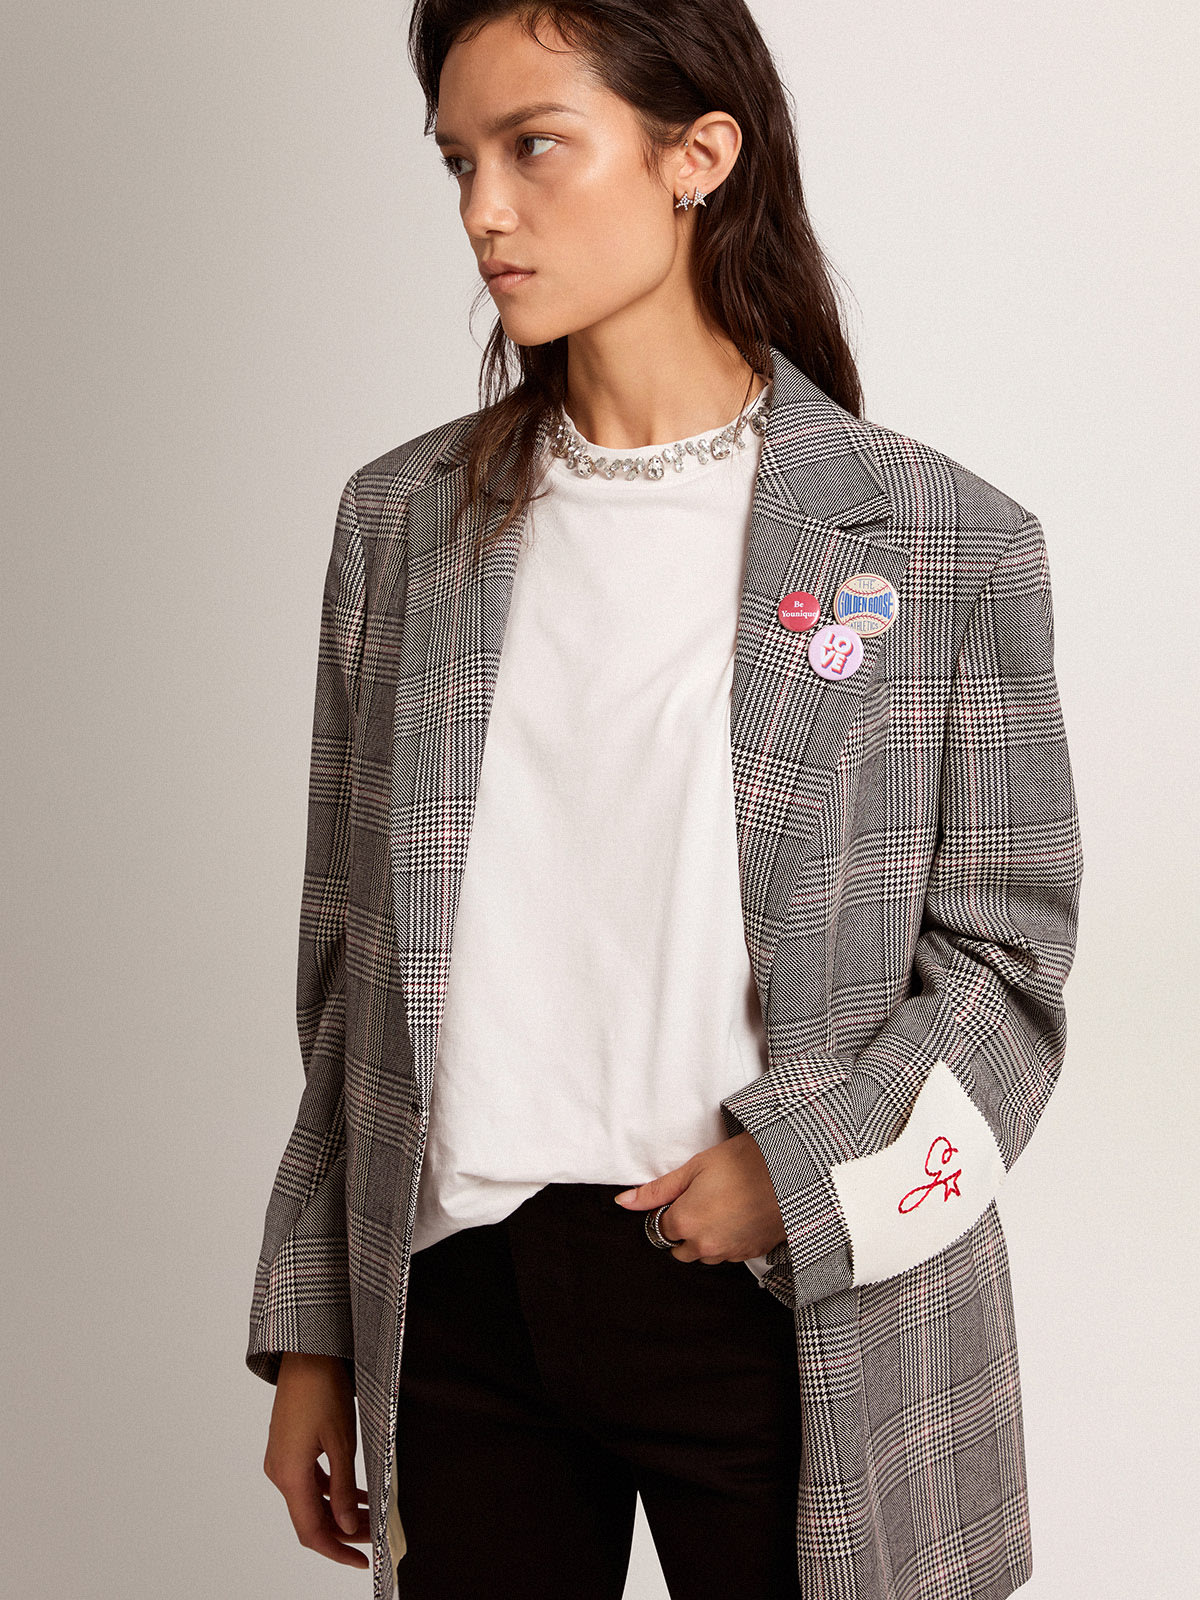 Golden Goose - Women’s Golden Collection single-breasted blazer in gray and white Prince of Wales check in 